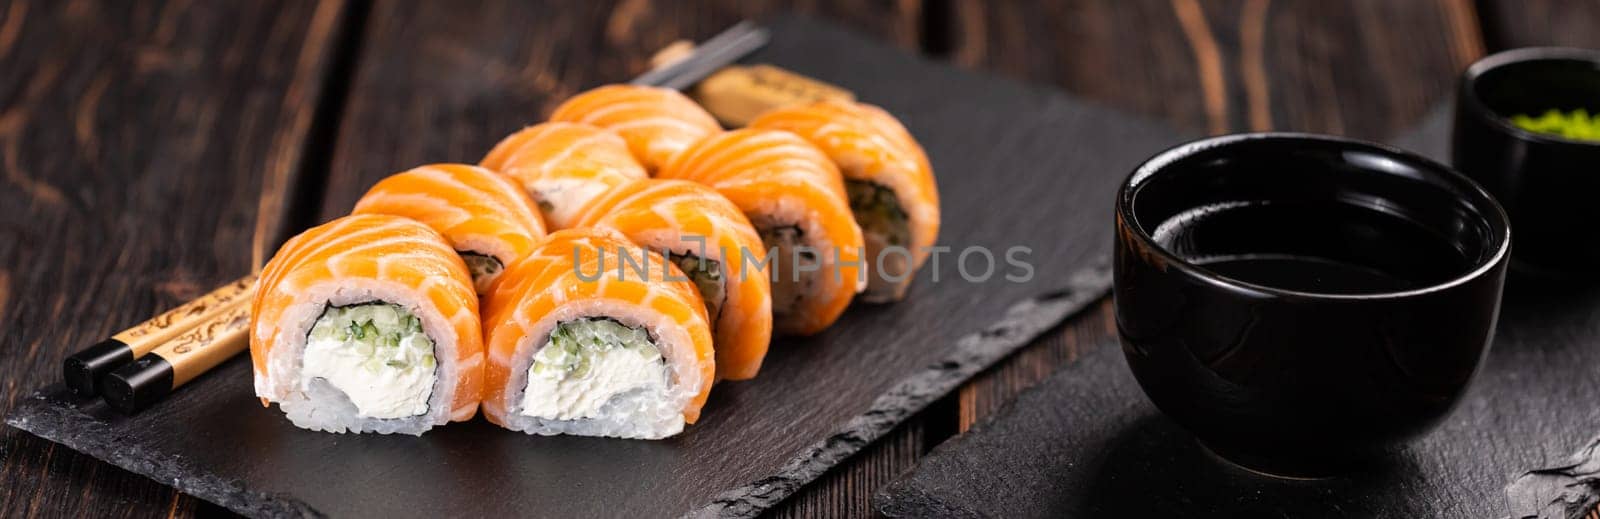 Sushi roll philadelphia with salmon and cucumber and cream cheese on black background. Sushi menu. Japanese food